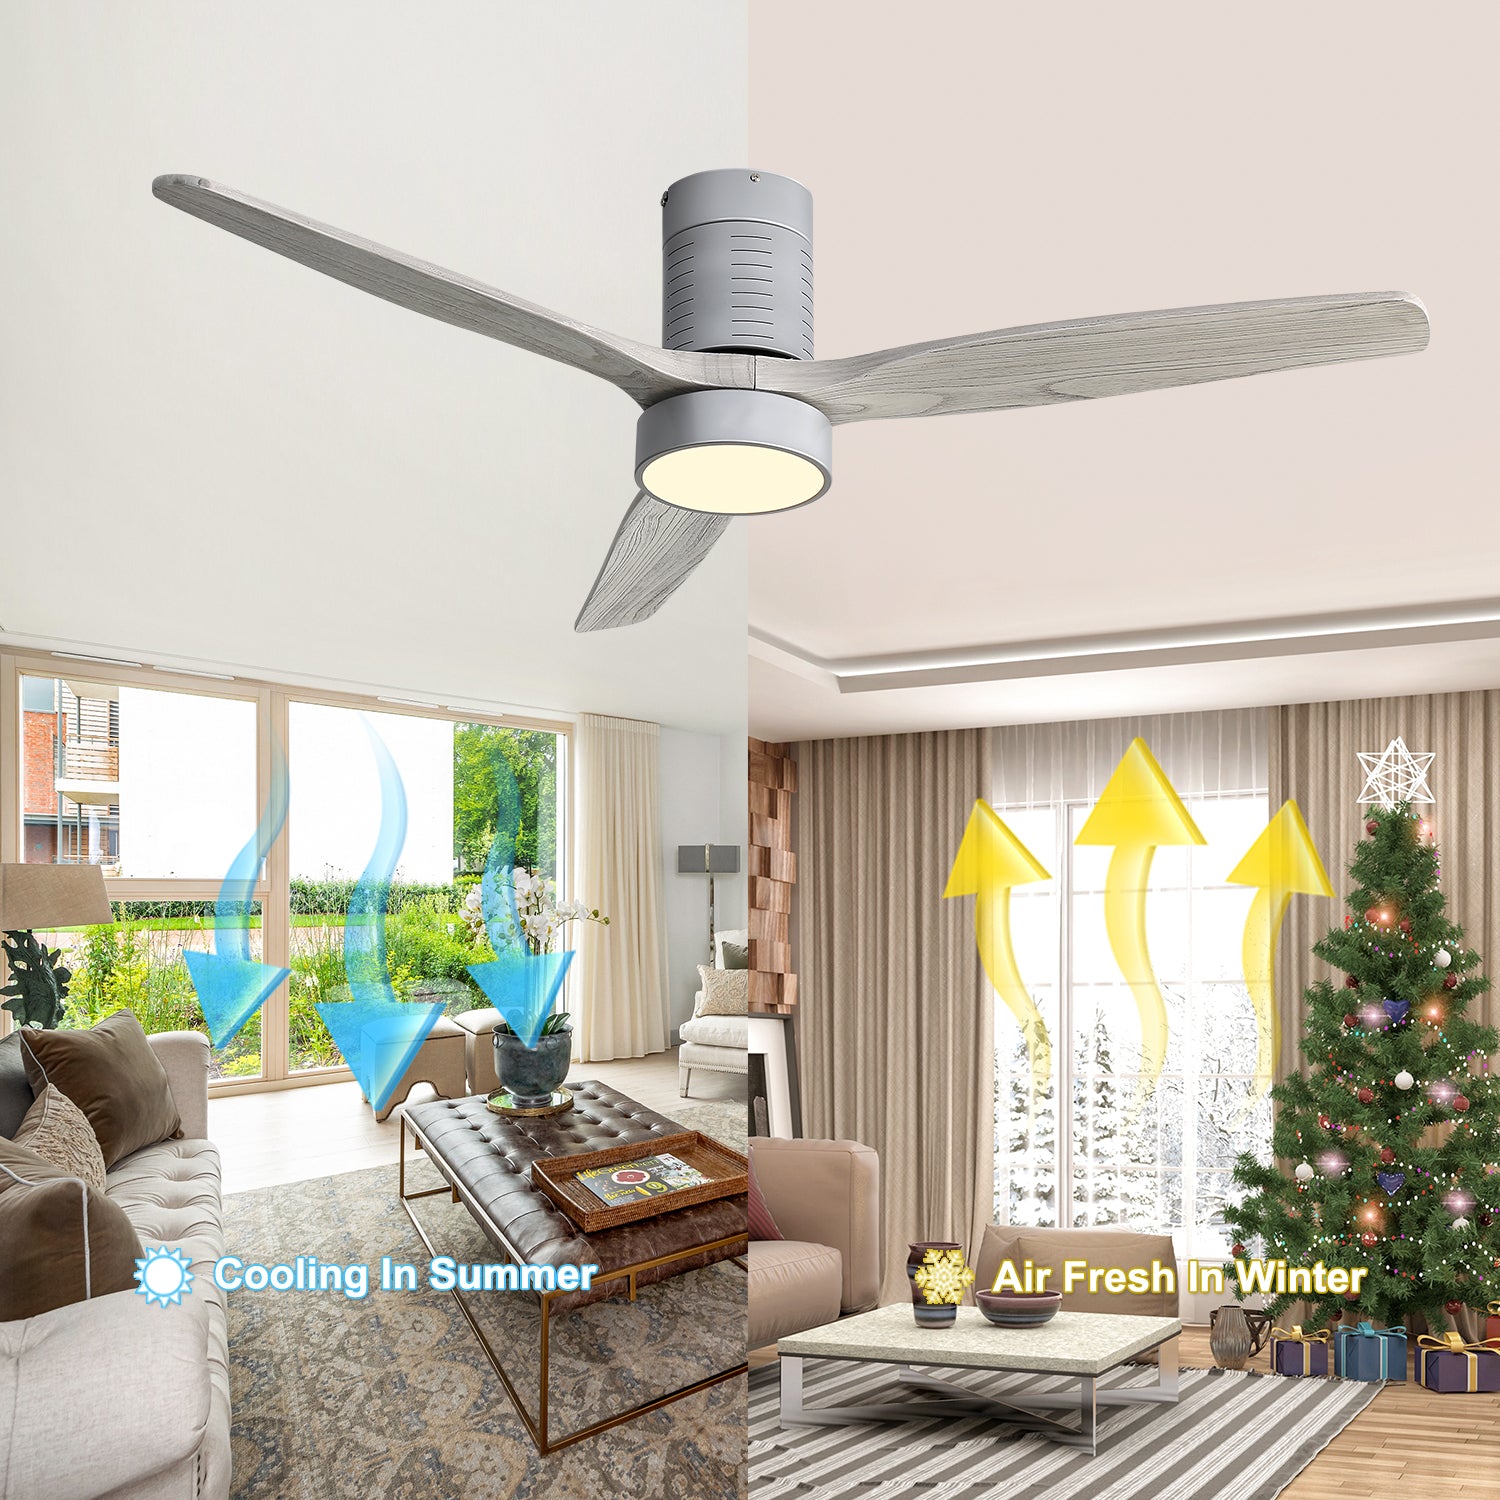 52 Inch 18W LED Ceiling Fan With Dimmable 6 Speed silver-metal & wood